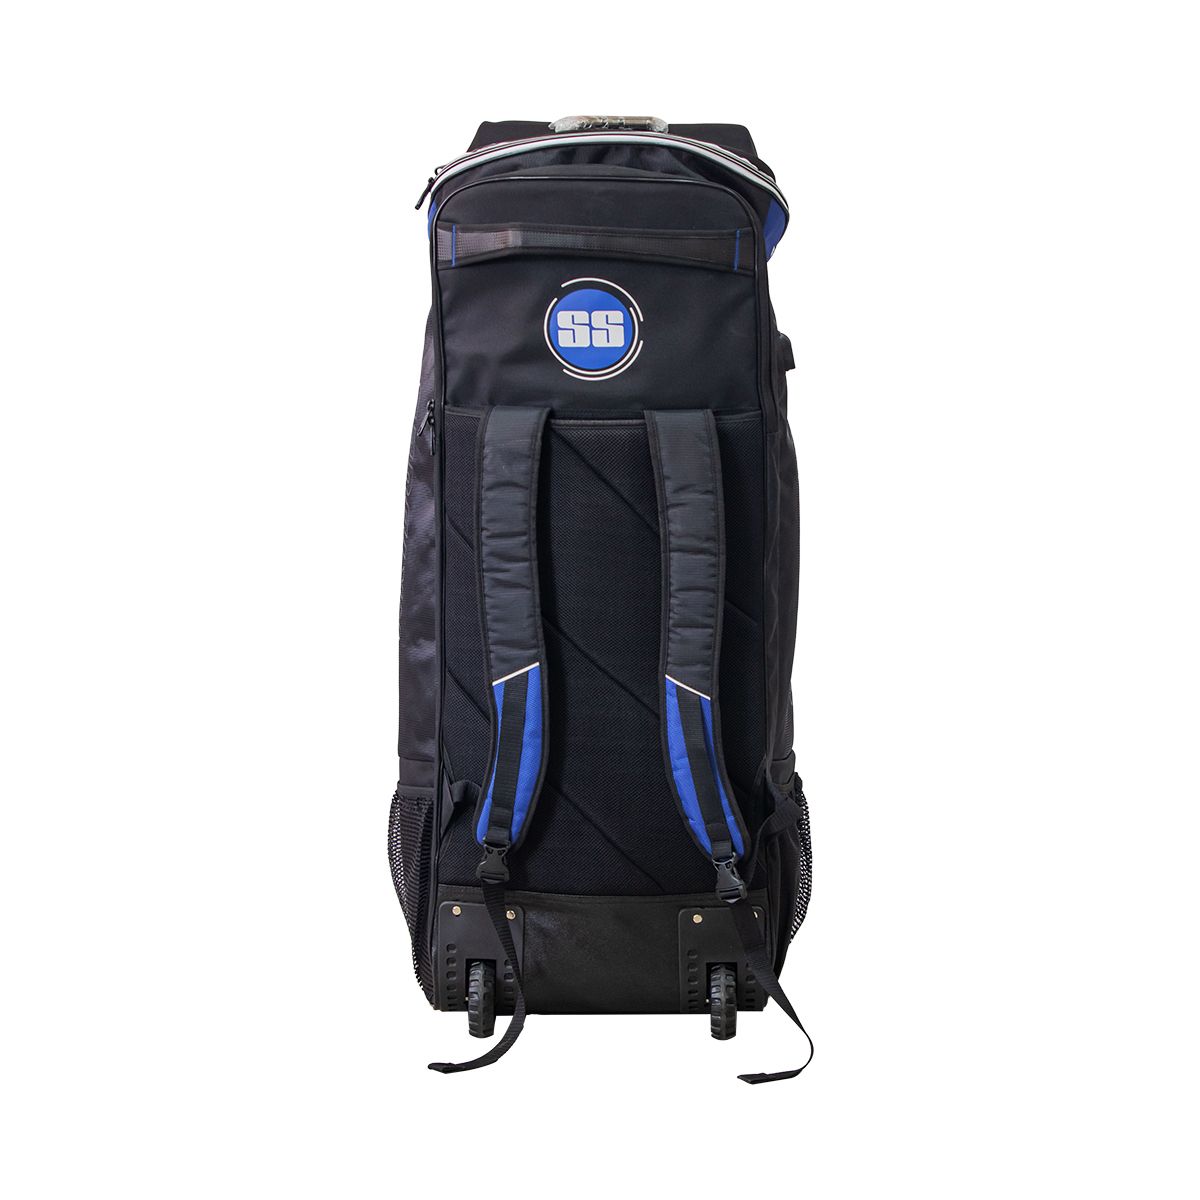 SS WORLD CUP EDITION DUFFLE CRICKET BAG - BLUE